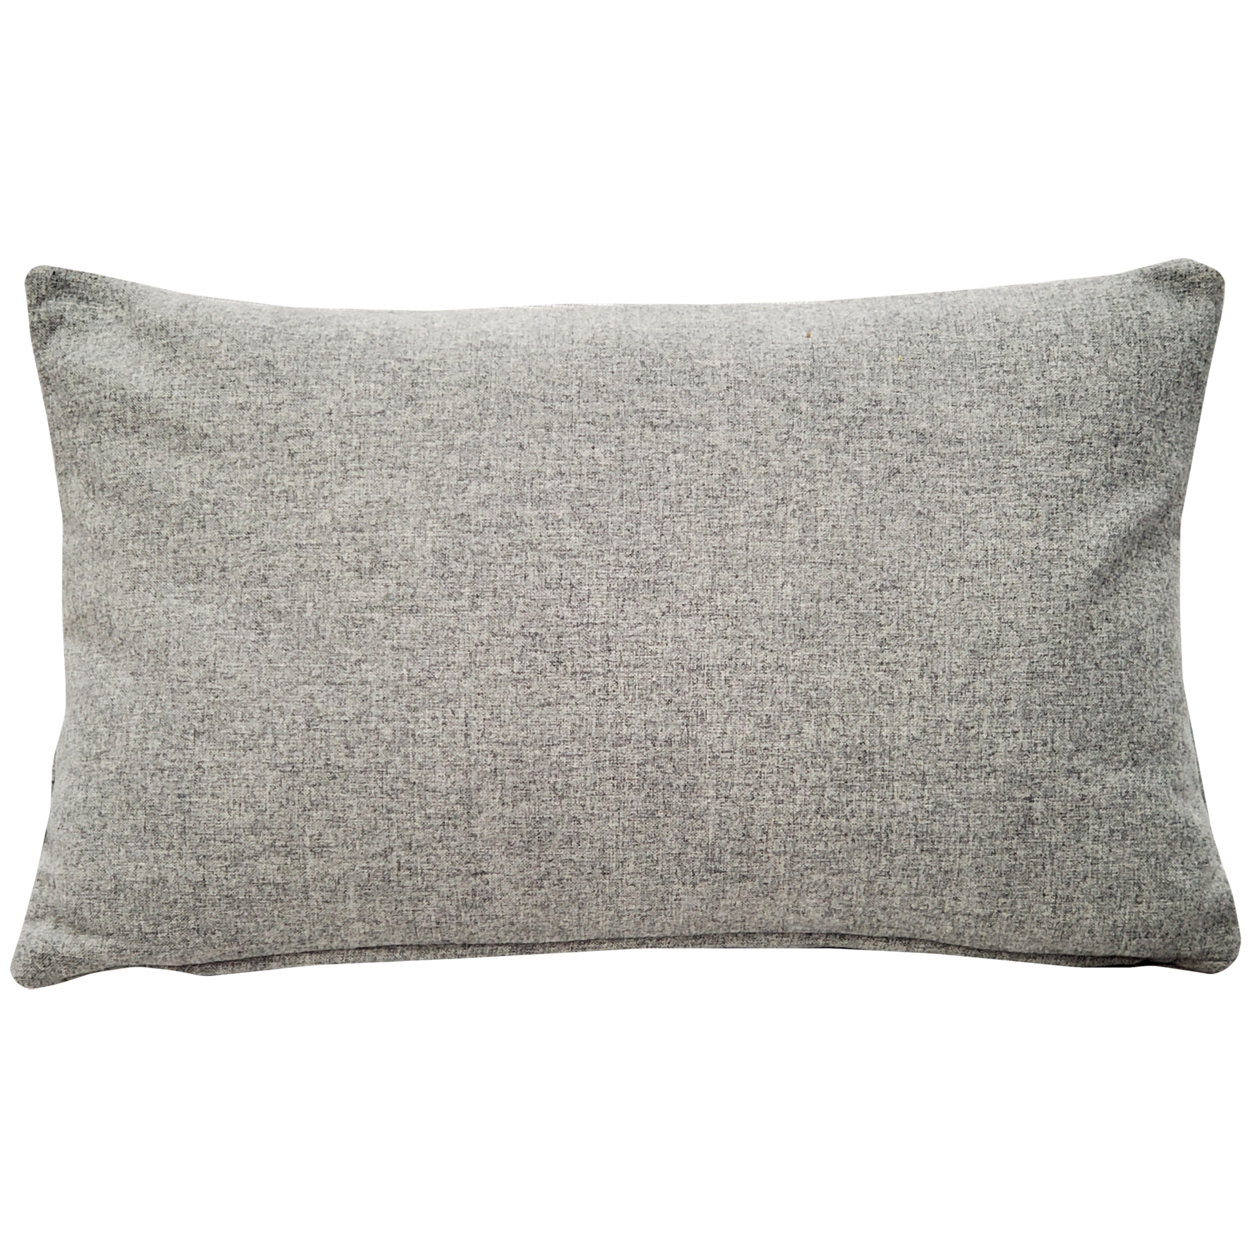 Vancouver Gray Felt Coordinates Pillow 12x19 Inches Square, Complete Pillow With Polyfill Pillow Insert